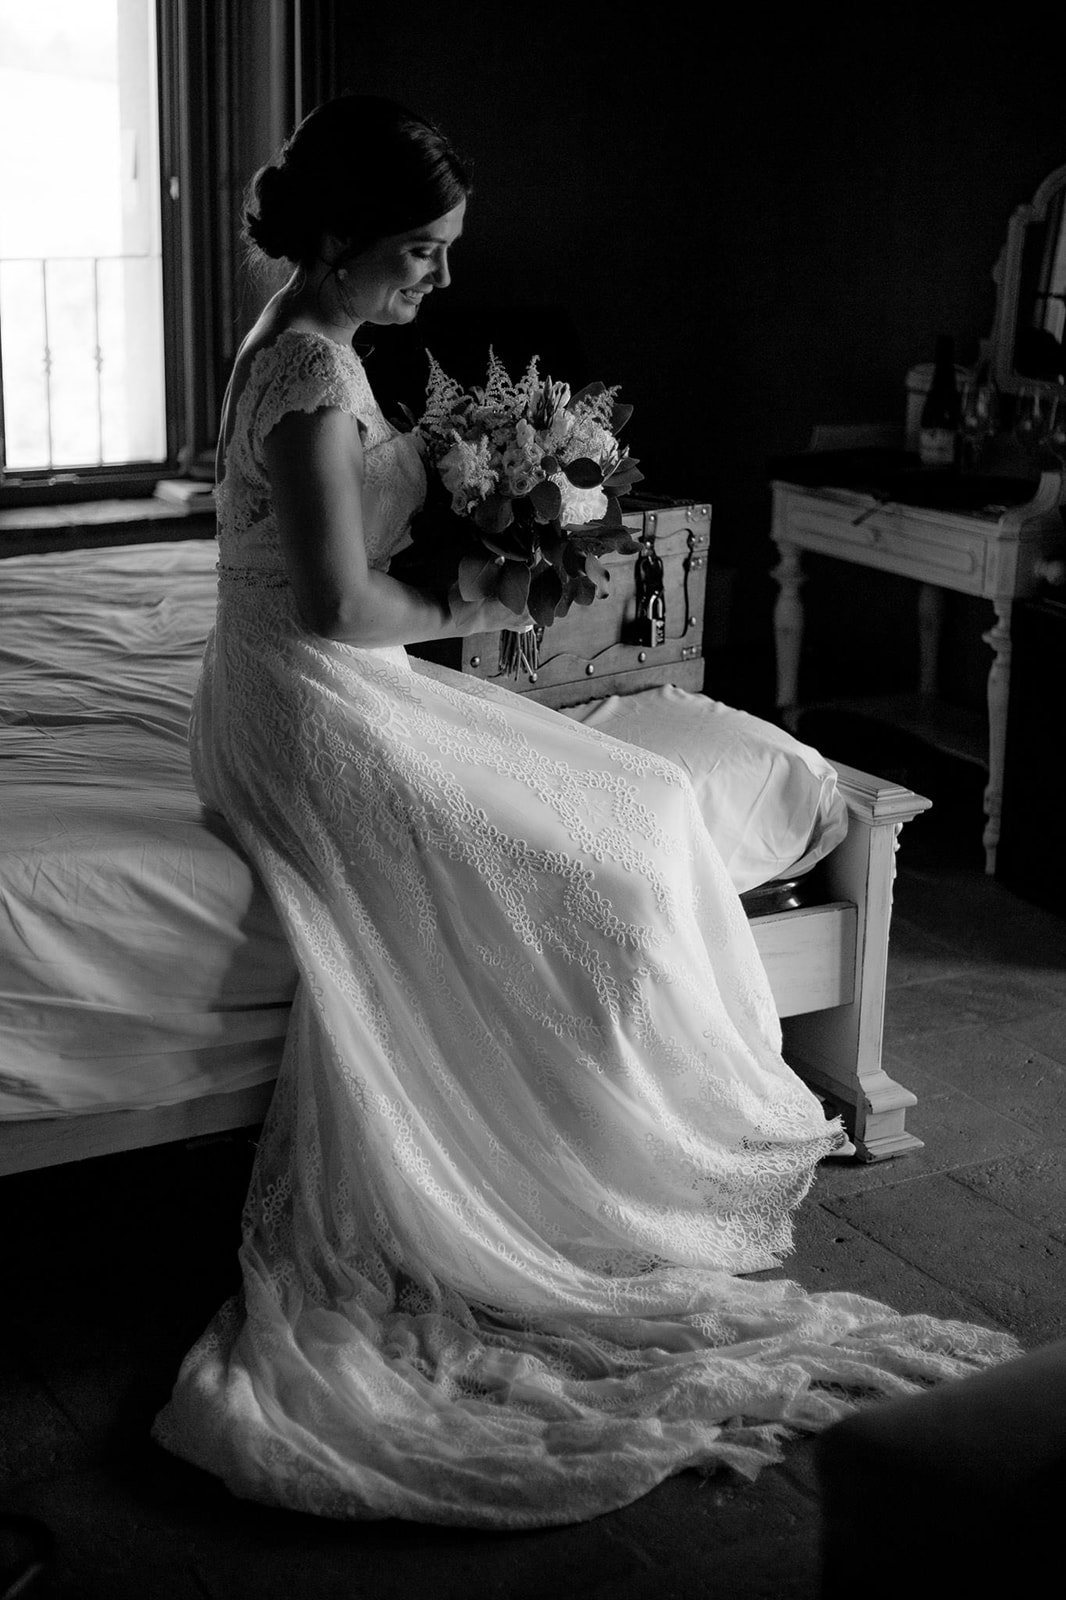 Portrait of the bride sitting on the bed, in black and white